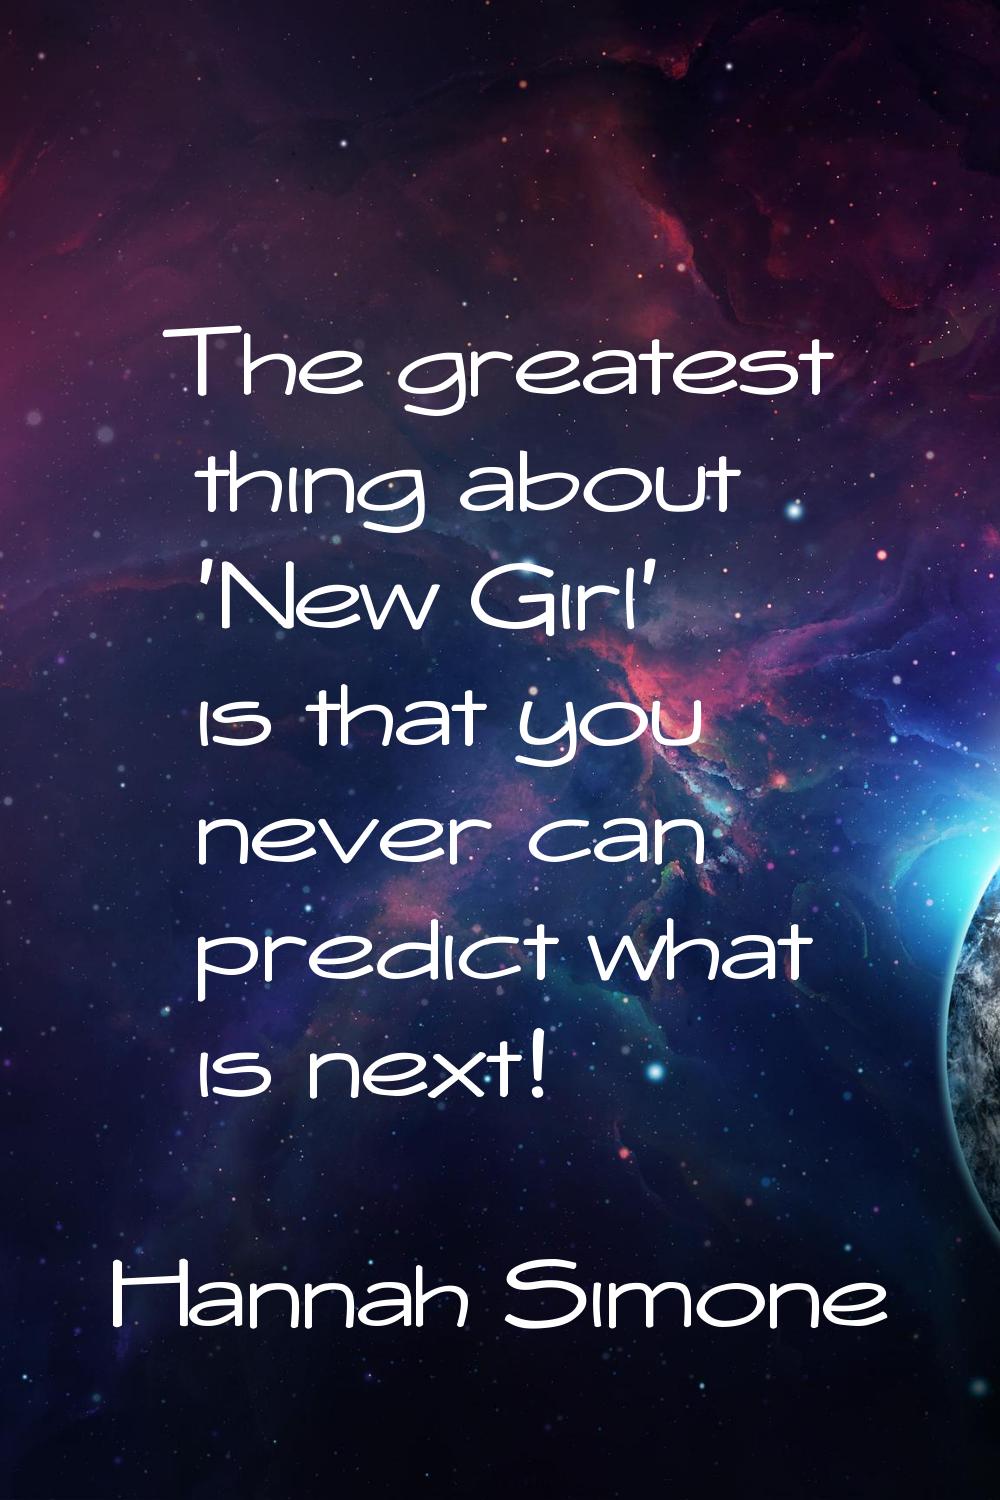 The greatest thing about 'New Girl' is that you never can predict what is next!